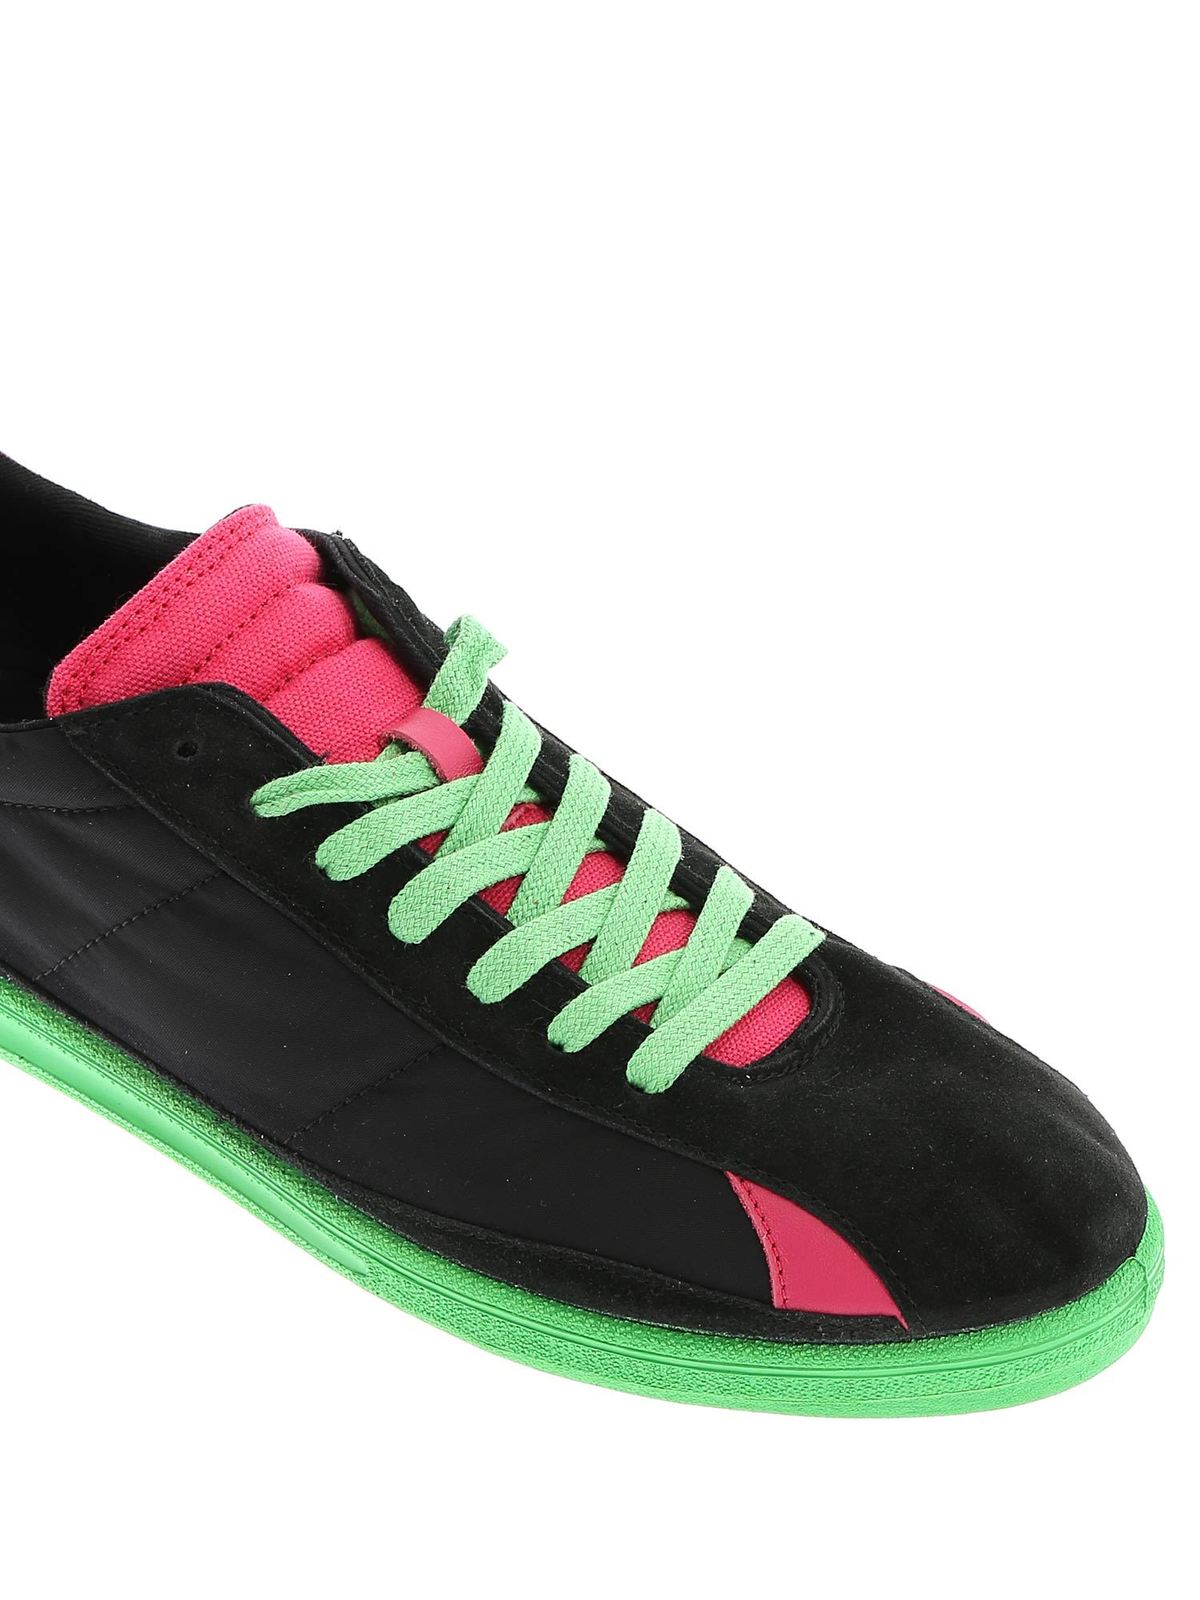 Shop Comme Des Garçons Shirt Sneakers In Black Fuchsia And Green